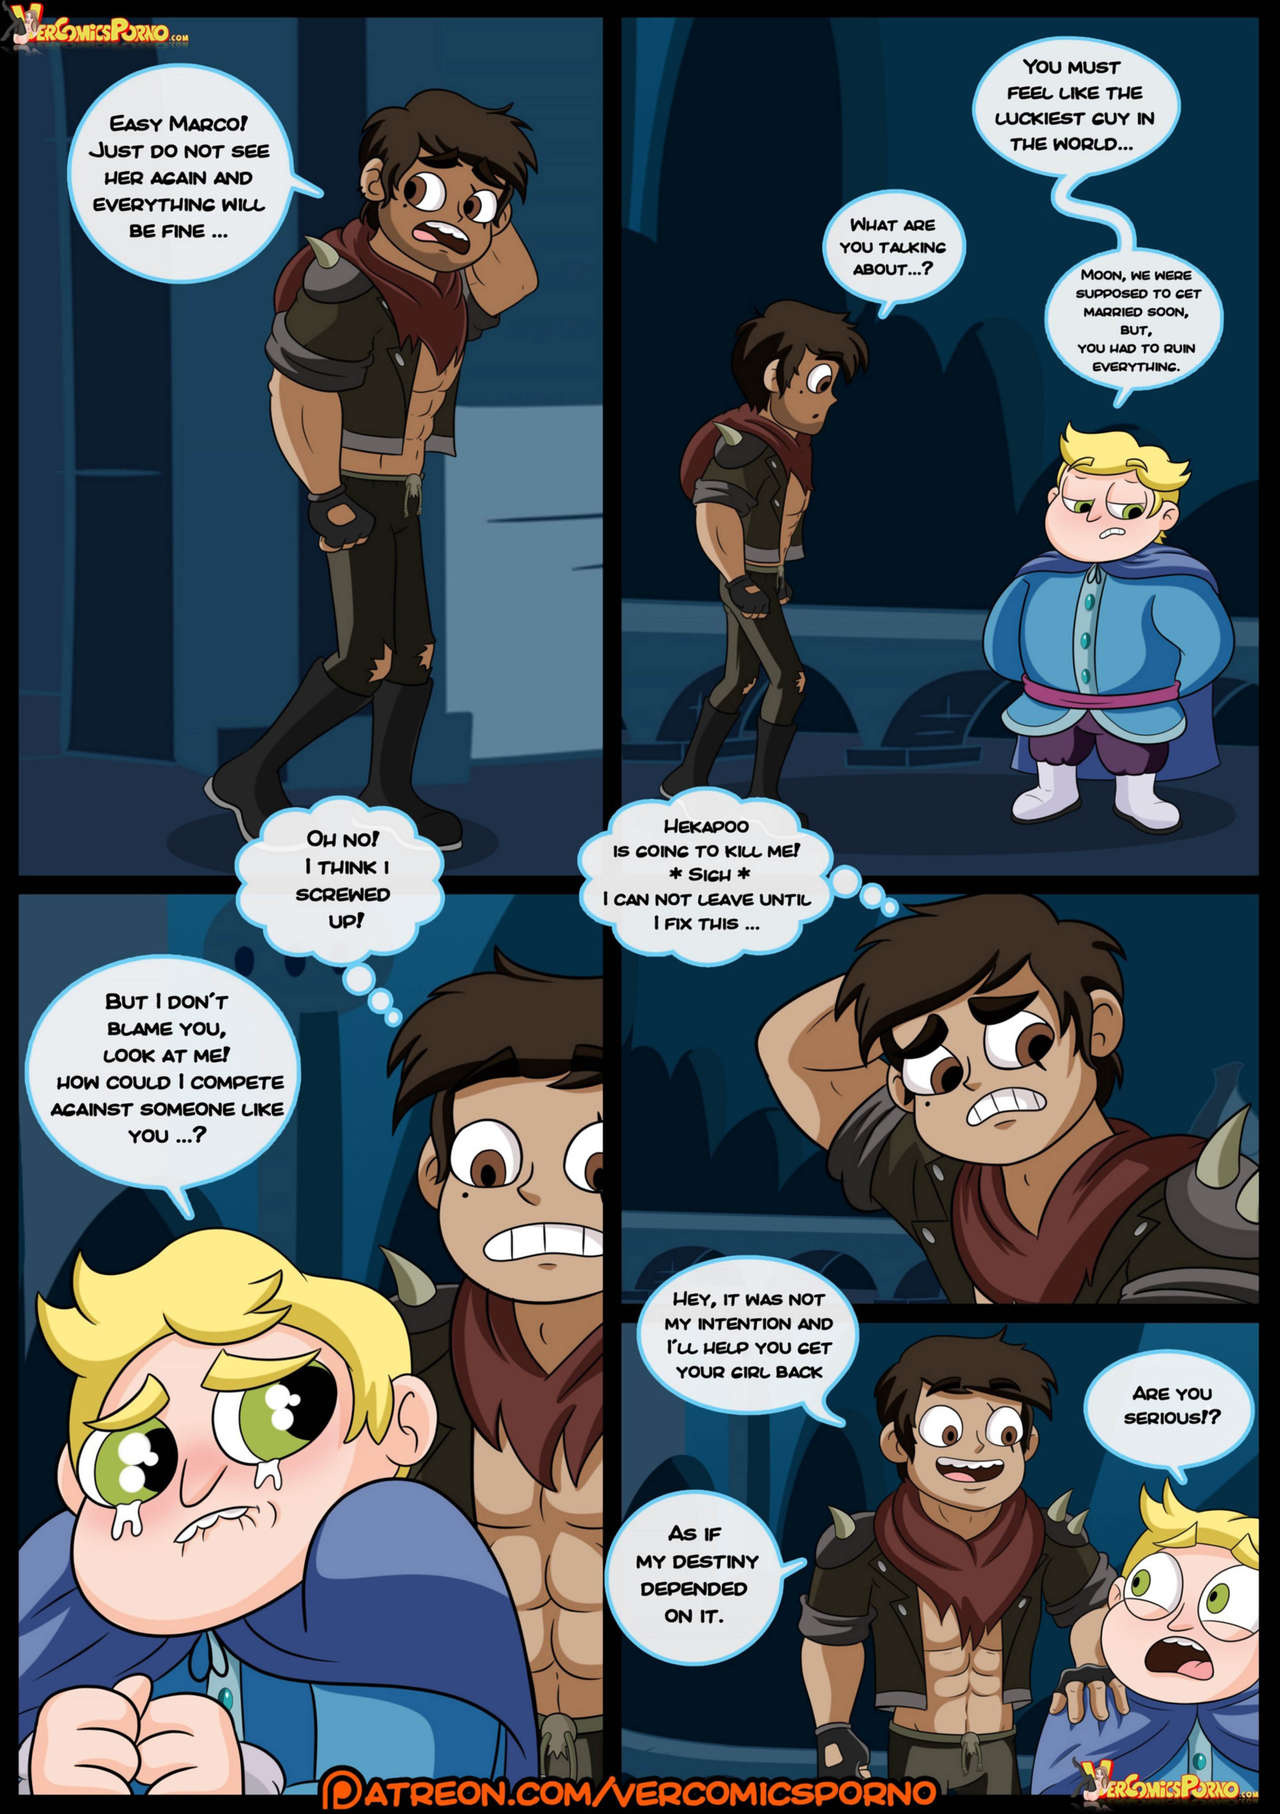 Marco vs The forces of time porn comics Oral sex, Big Tits, Blowjob, cunnilingus, Straight